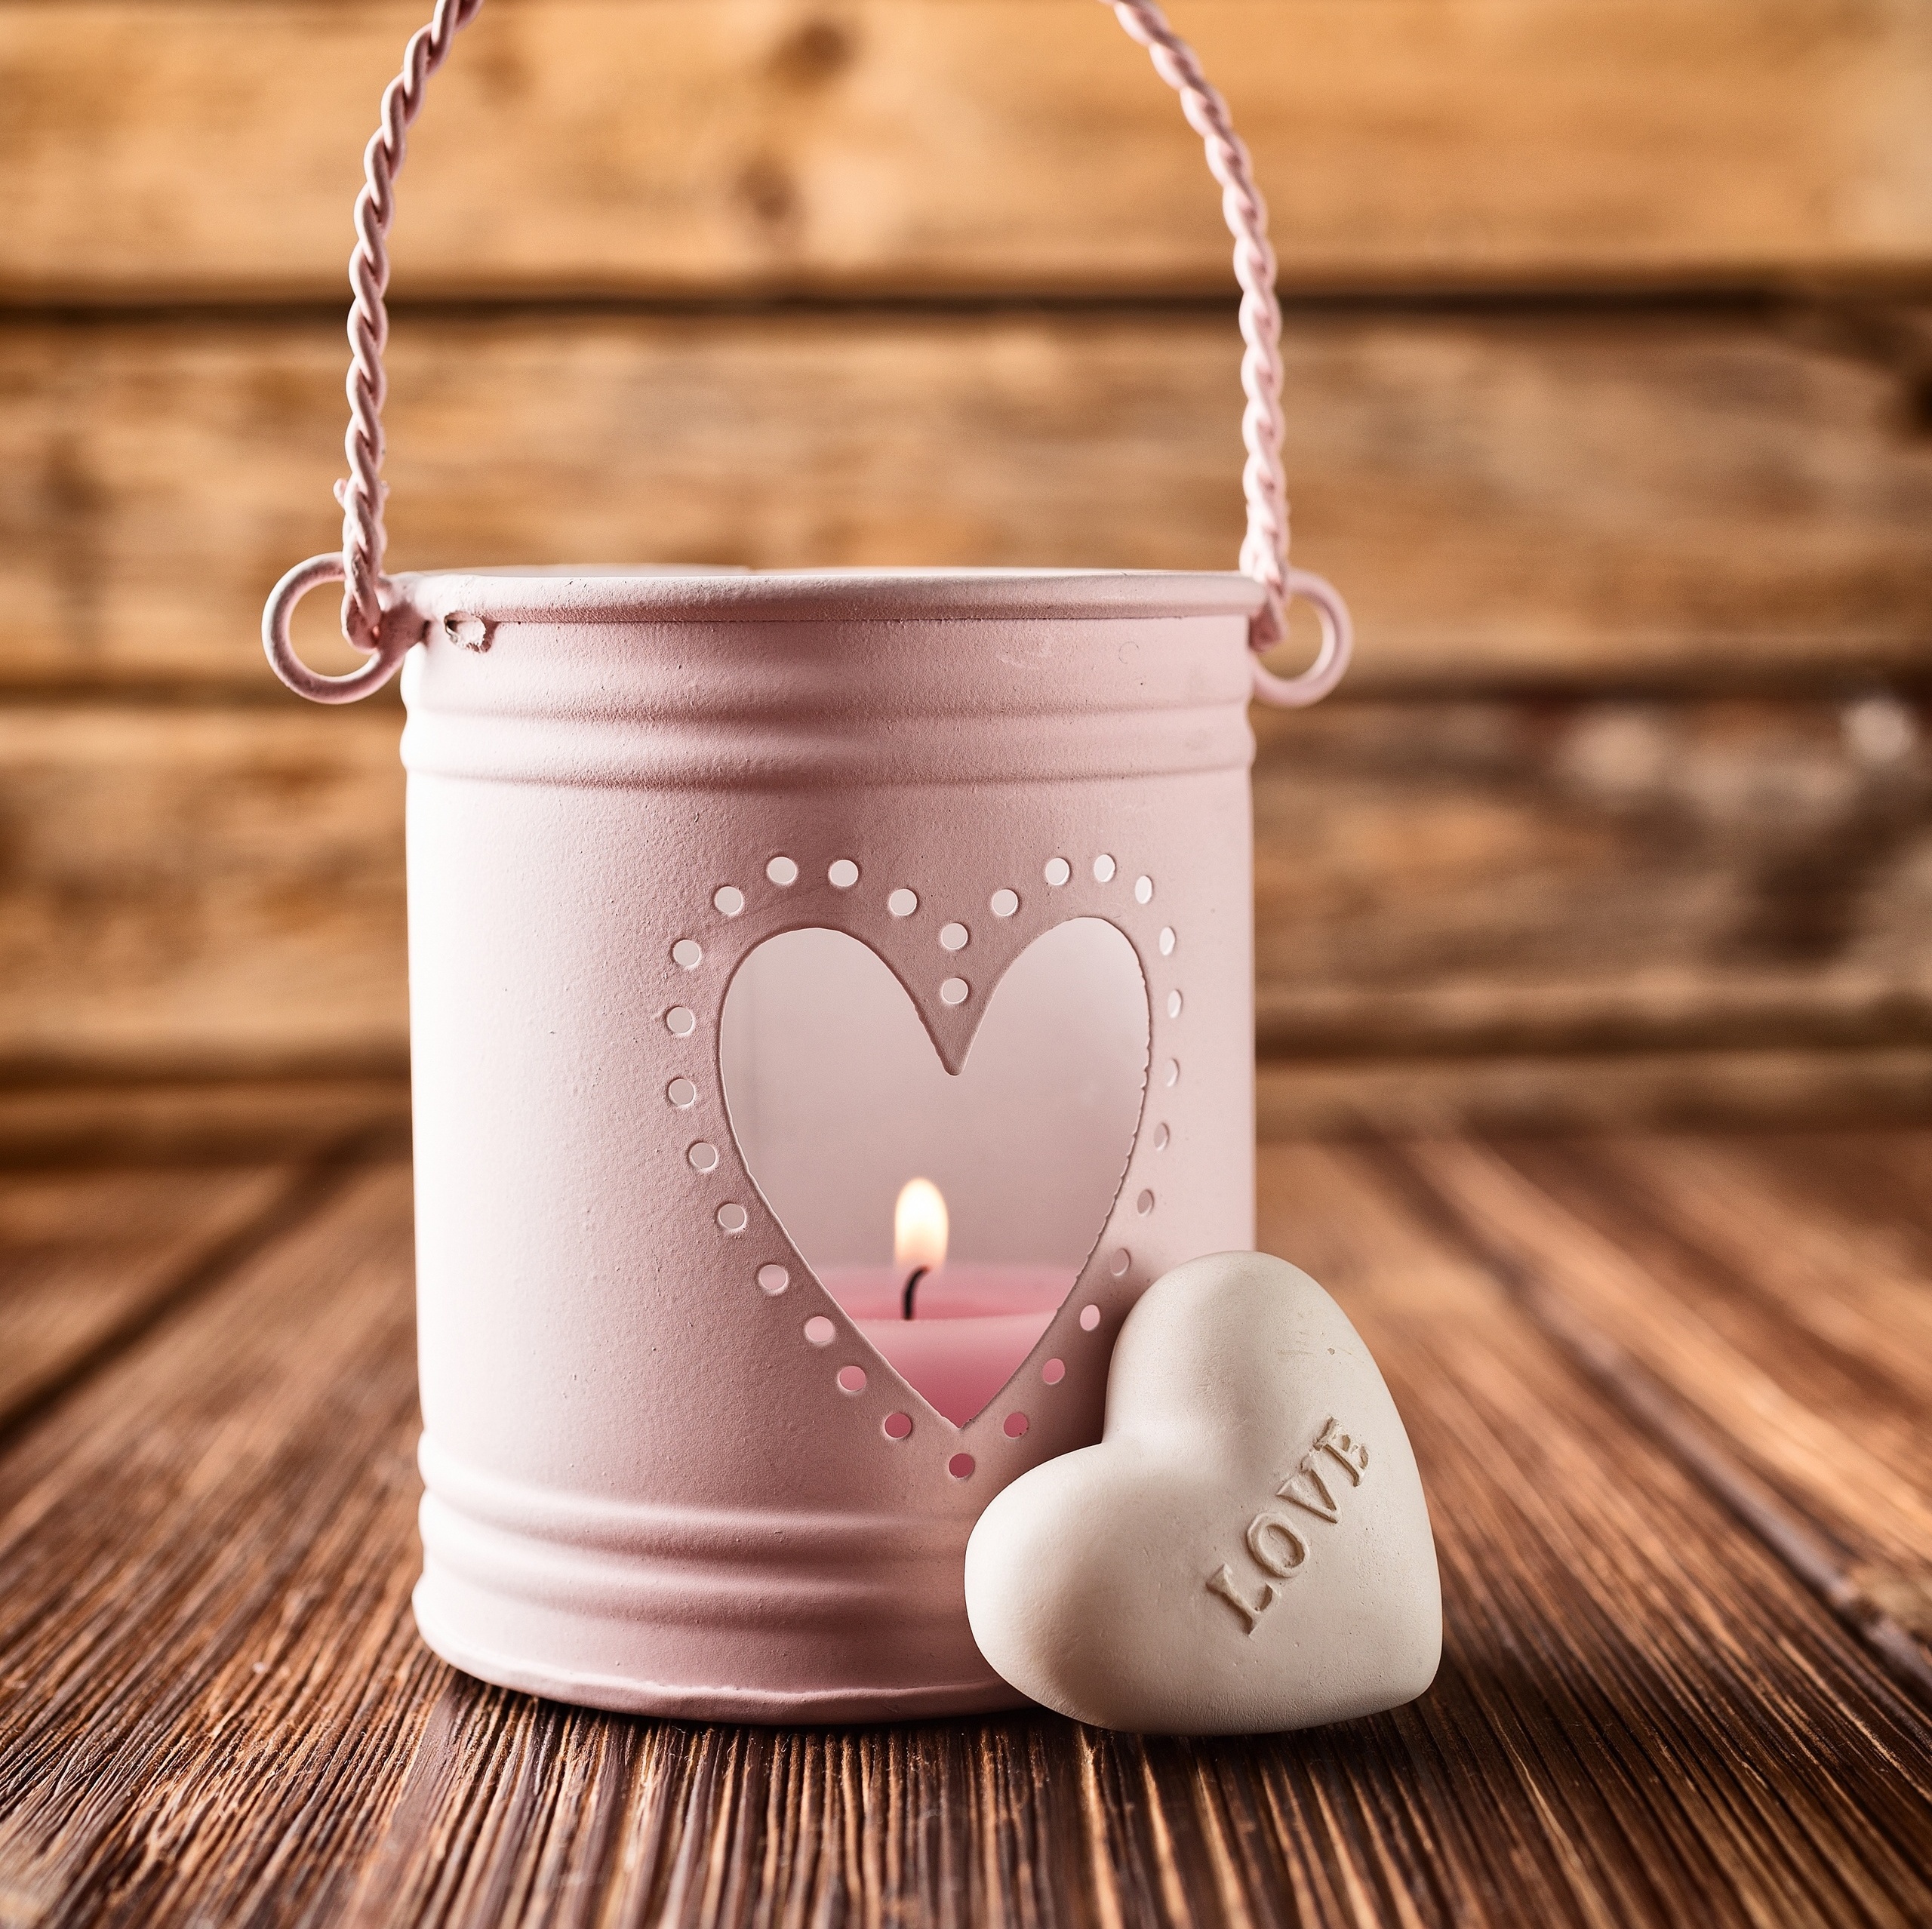 General 2560x2556 love pink candles